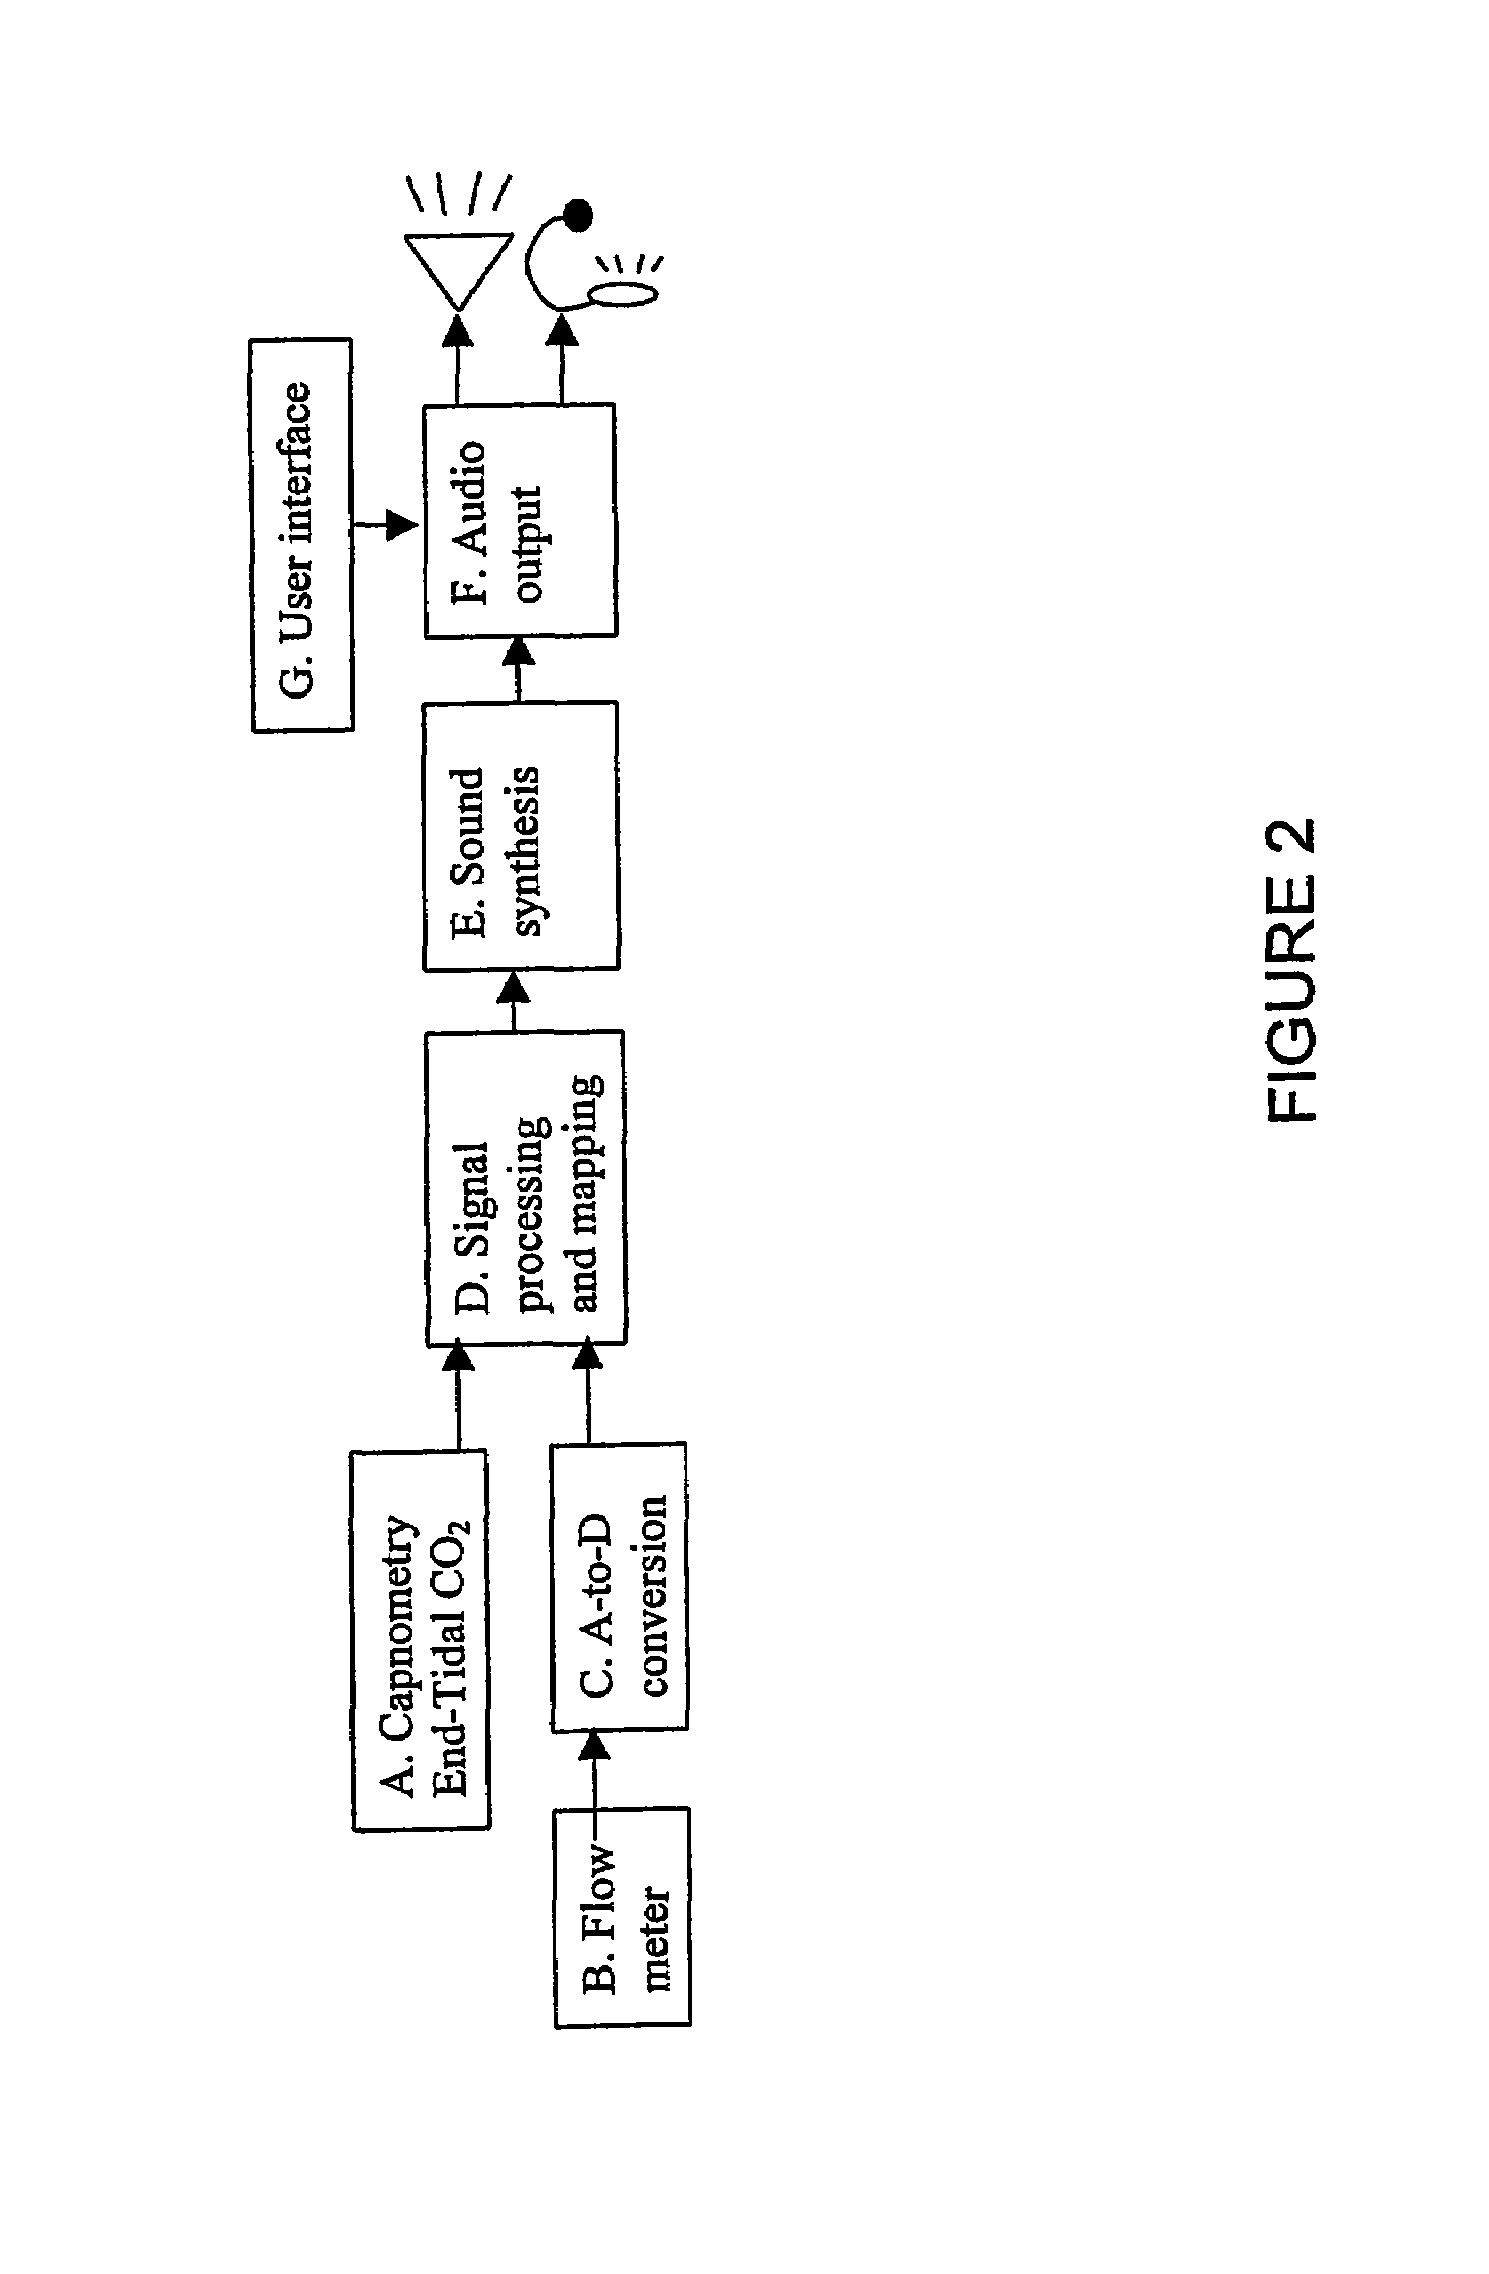 Method and means of physiological monitoring using sonification